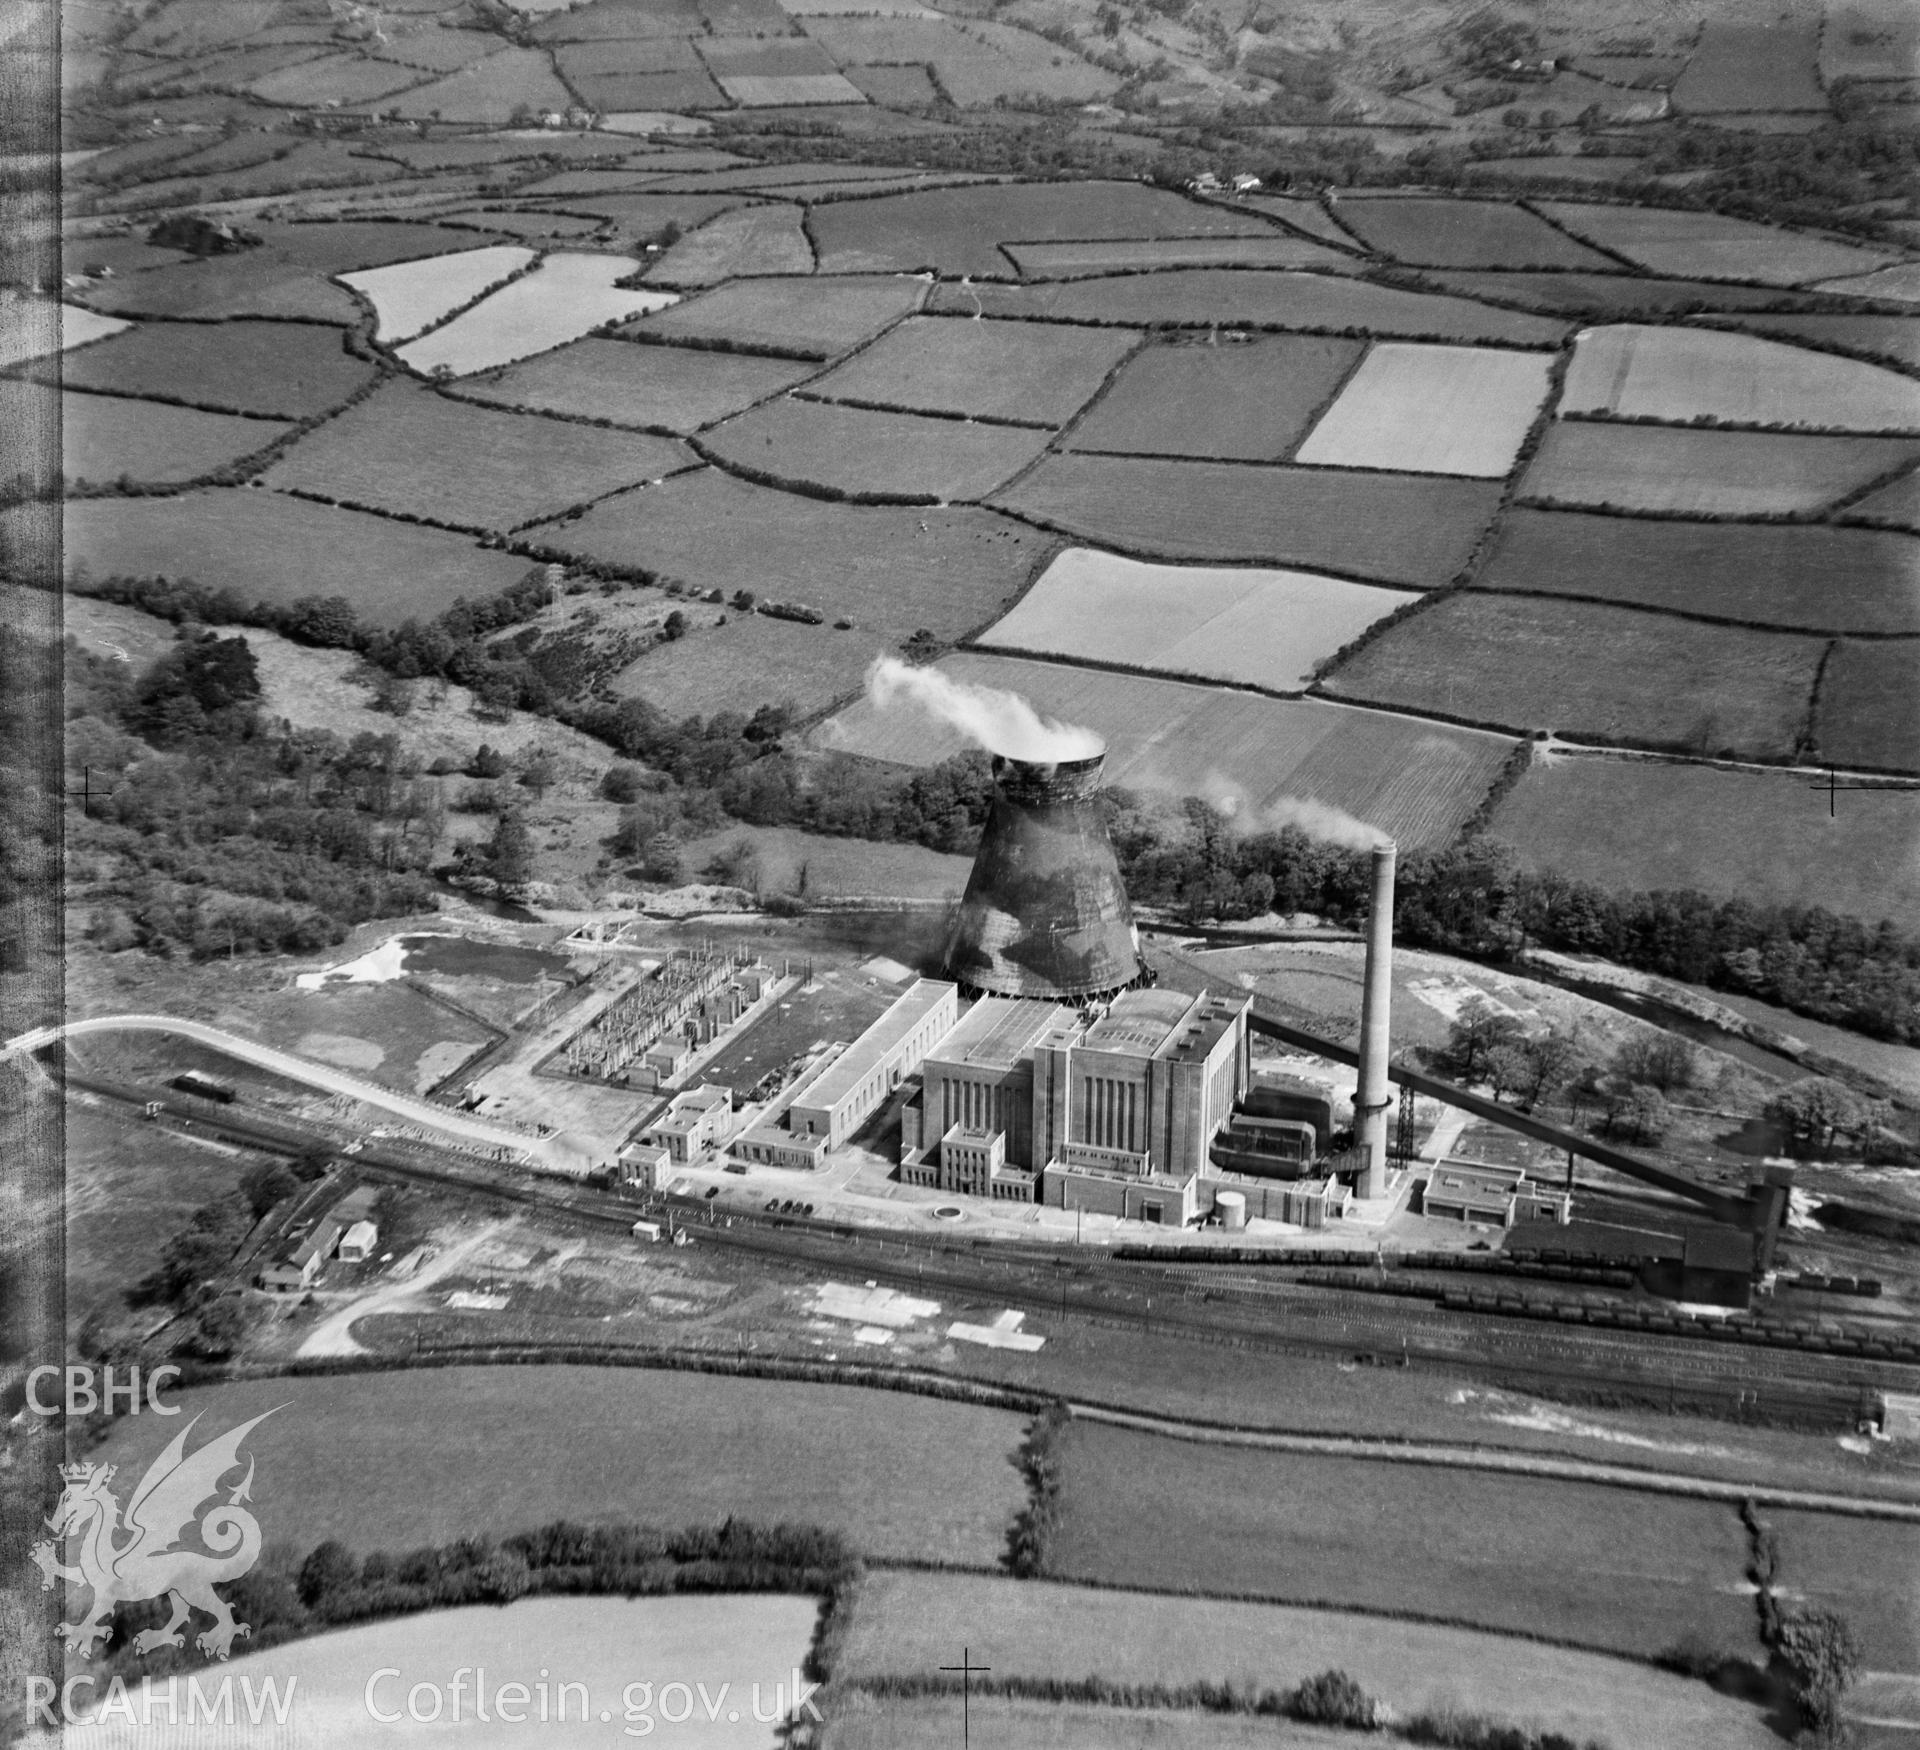 View labelled "South Wales Electric Power Co Bridgend Site", showing Llynfi Valley Power station with camoflaged cooling tower.